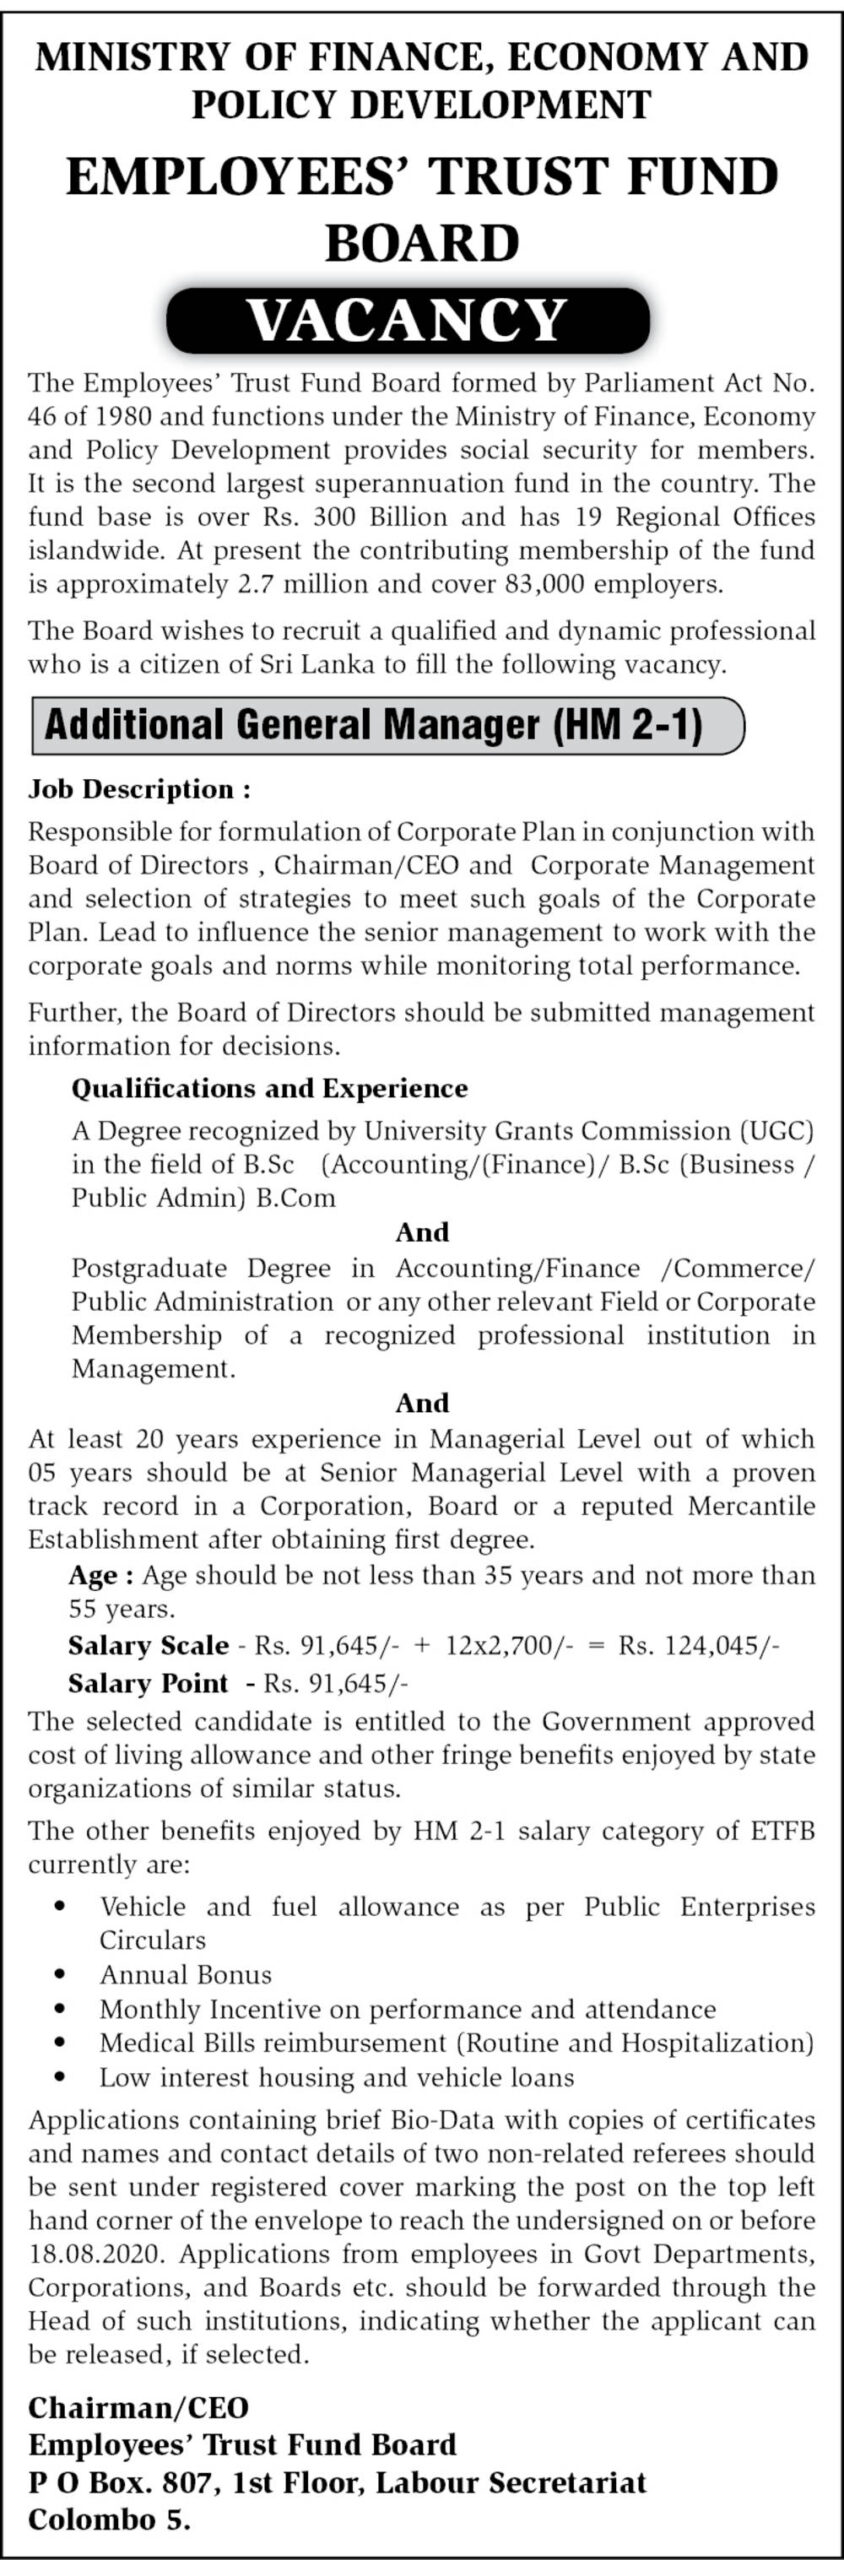 Additional General Manager – Employees’ Trust Fund Board 2